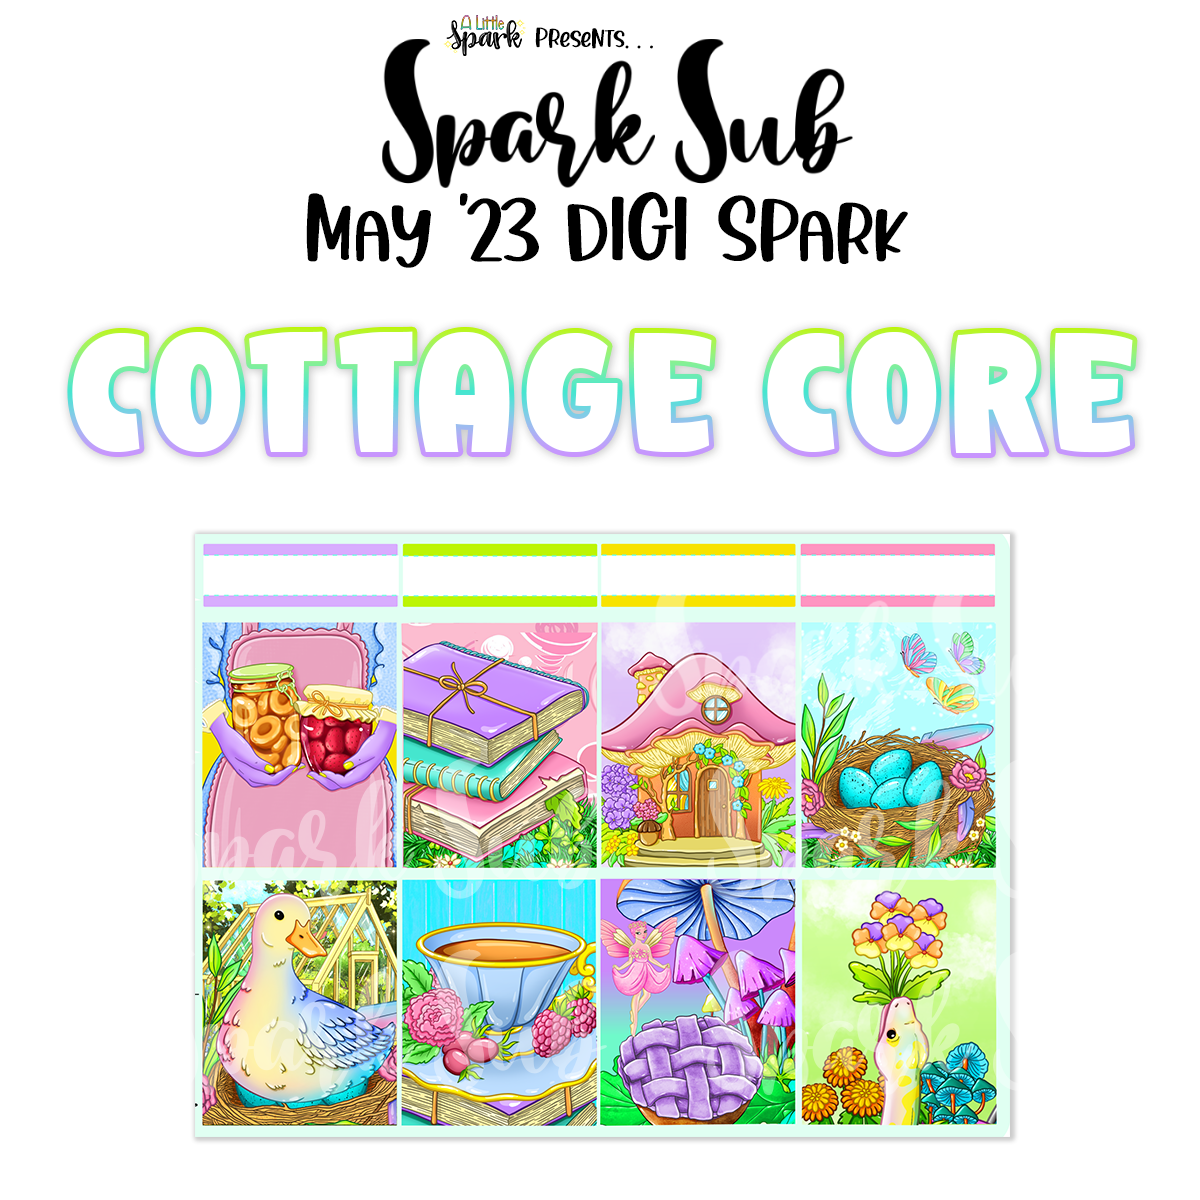 Digi Spark: Cottage Core ONE TIME PURCHASE